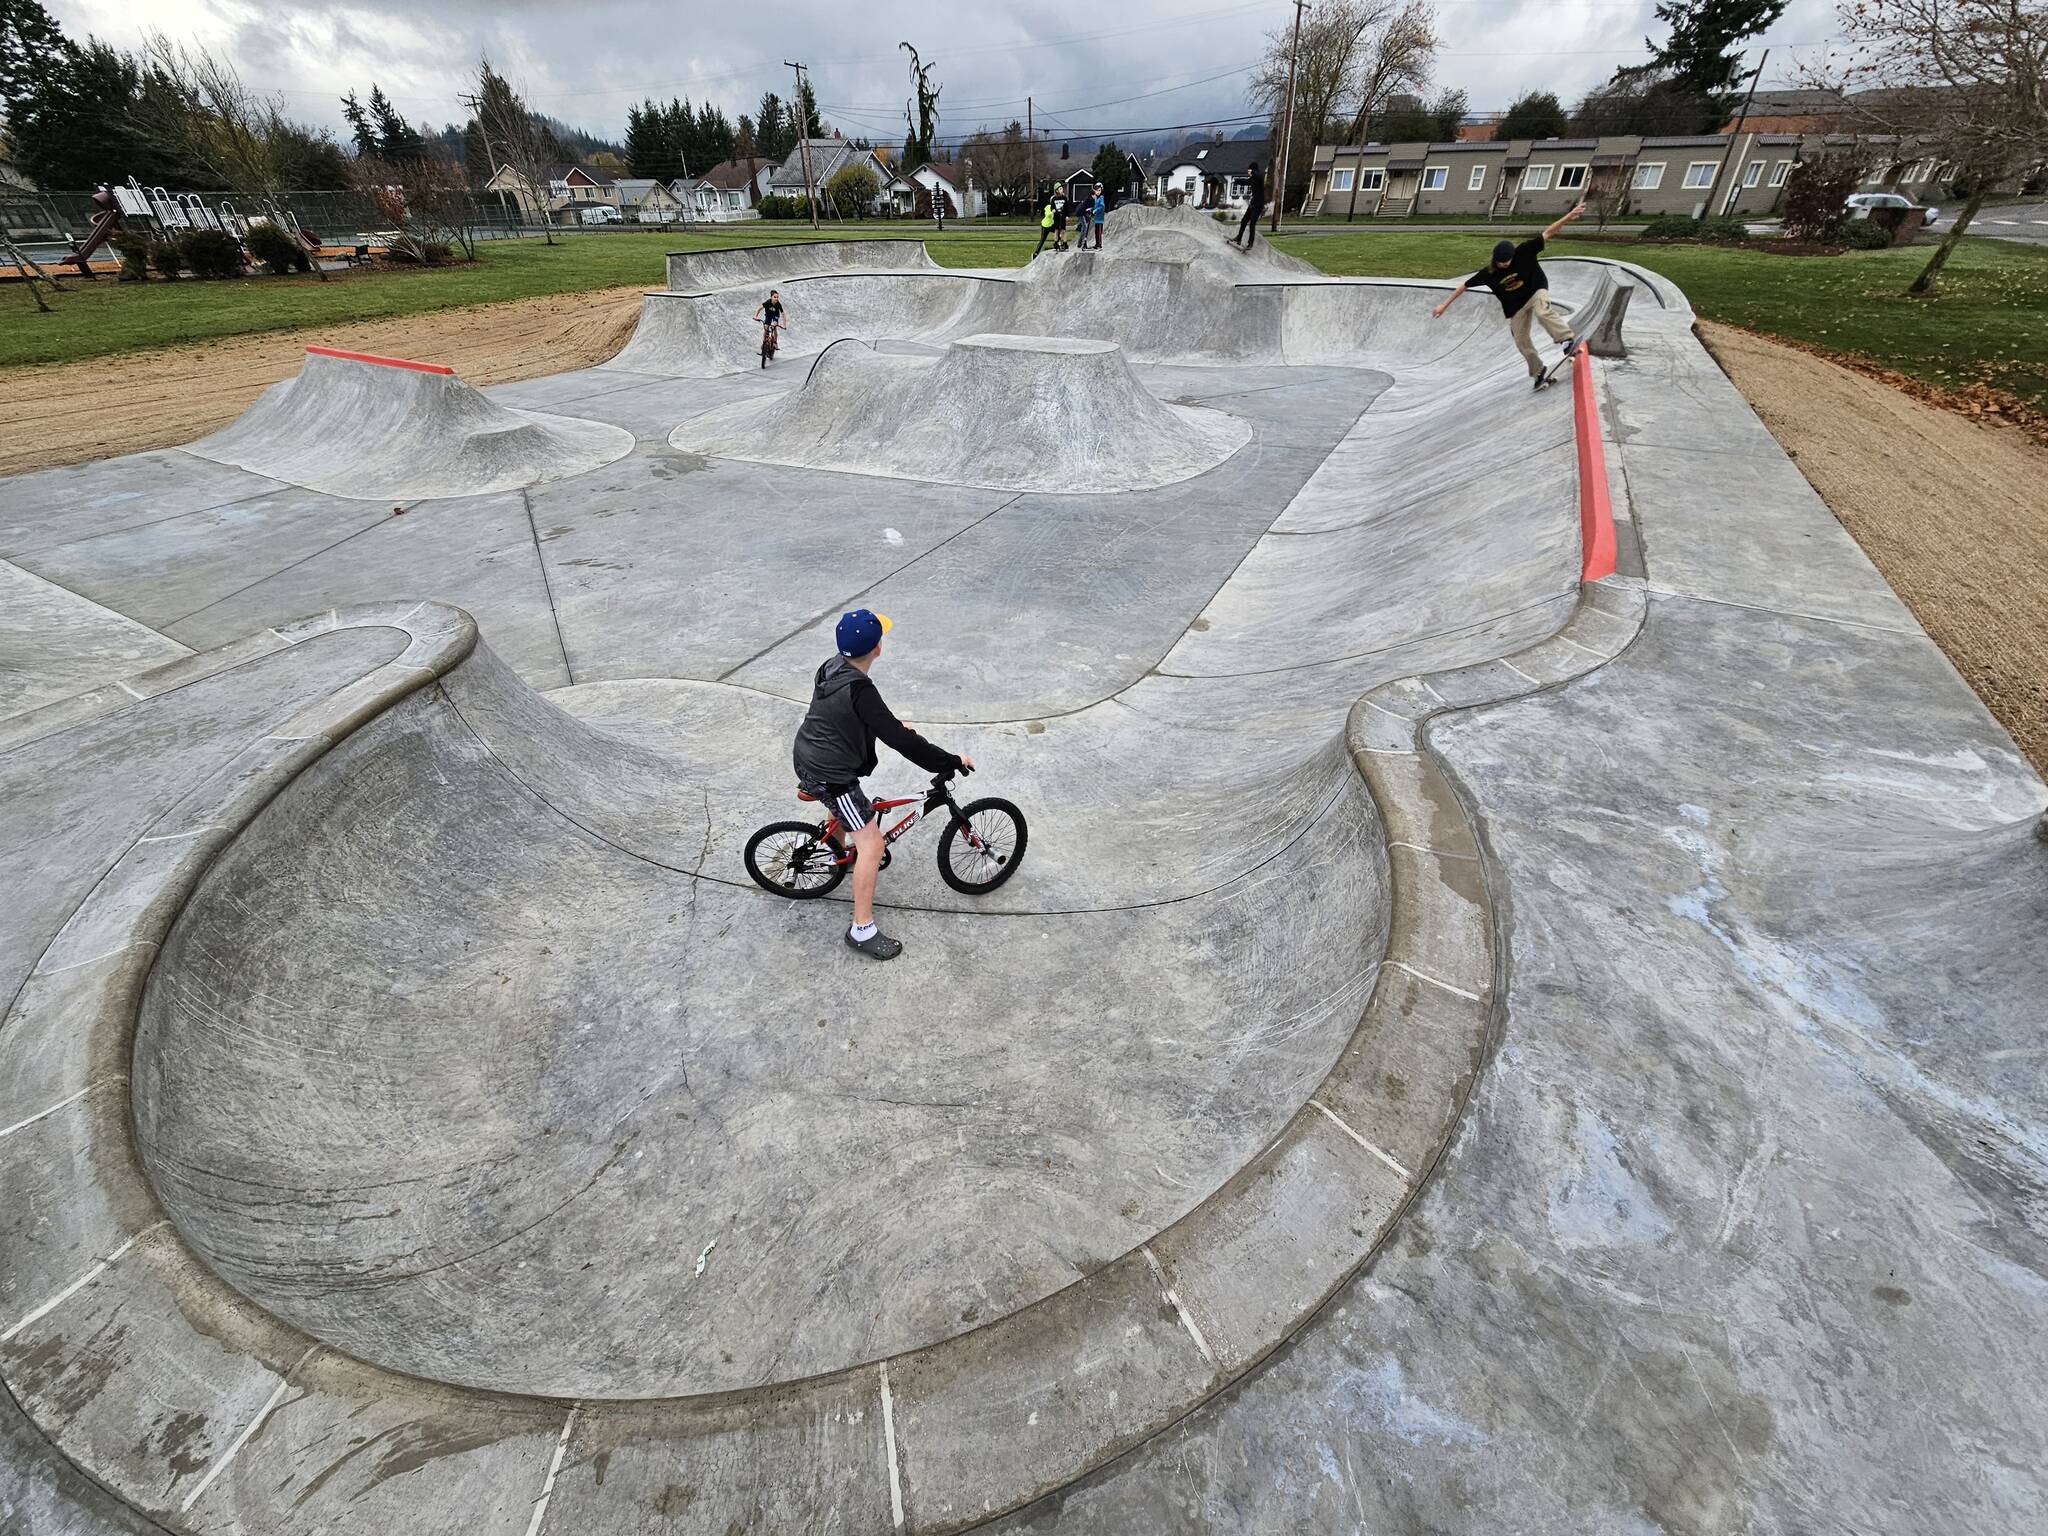 Photo by Ray Miller-Still
The new Enumclaw skatepark is now open — but please, stay off the soon-to-be grass.